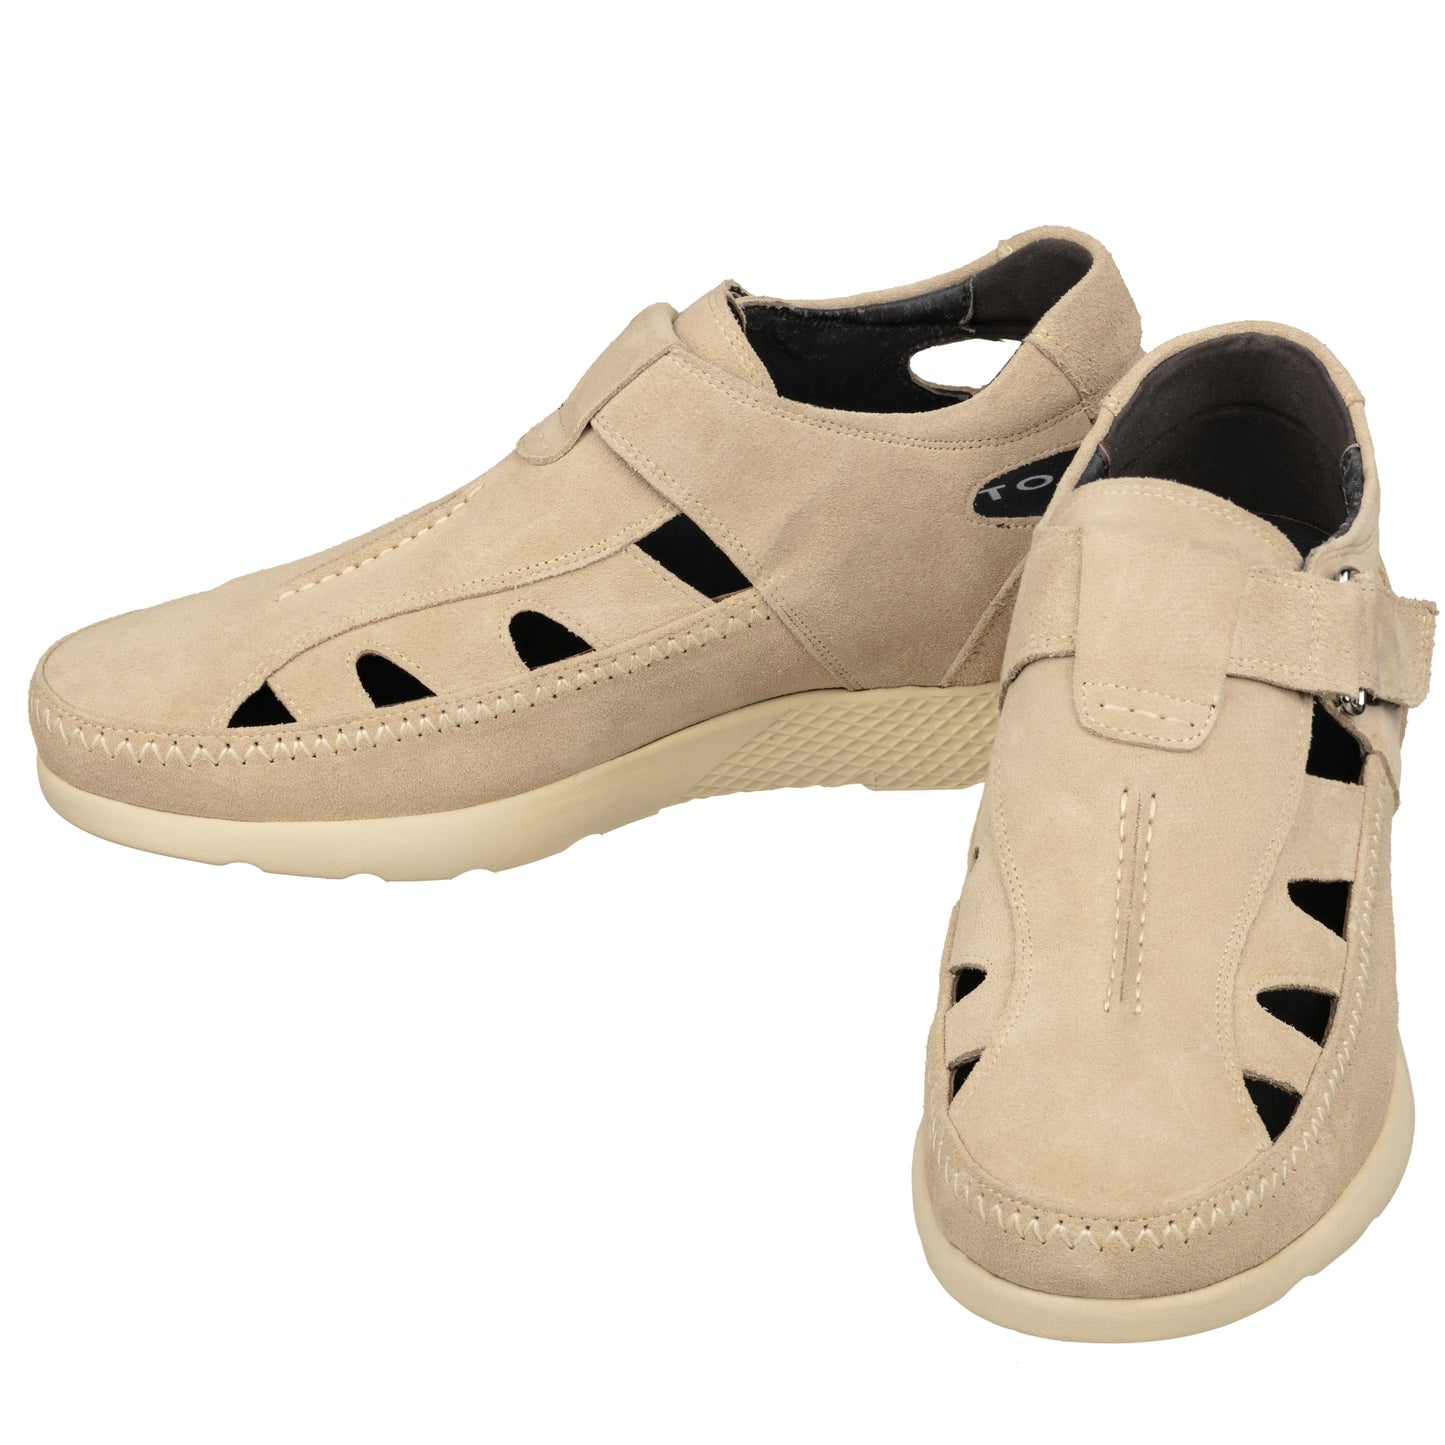 Elevator shoes height increase CALTO - K2135 - 2.6 Inches Taller (Beige) - Fisherman Sandal